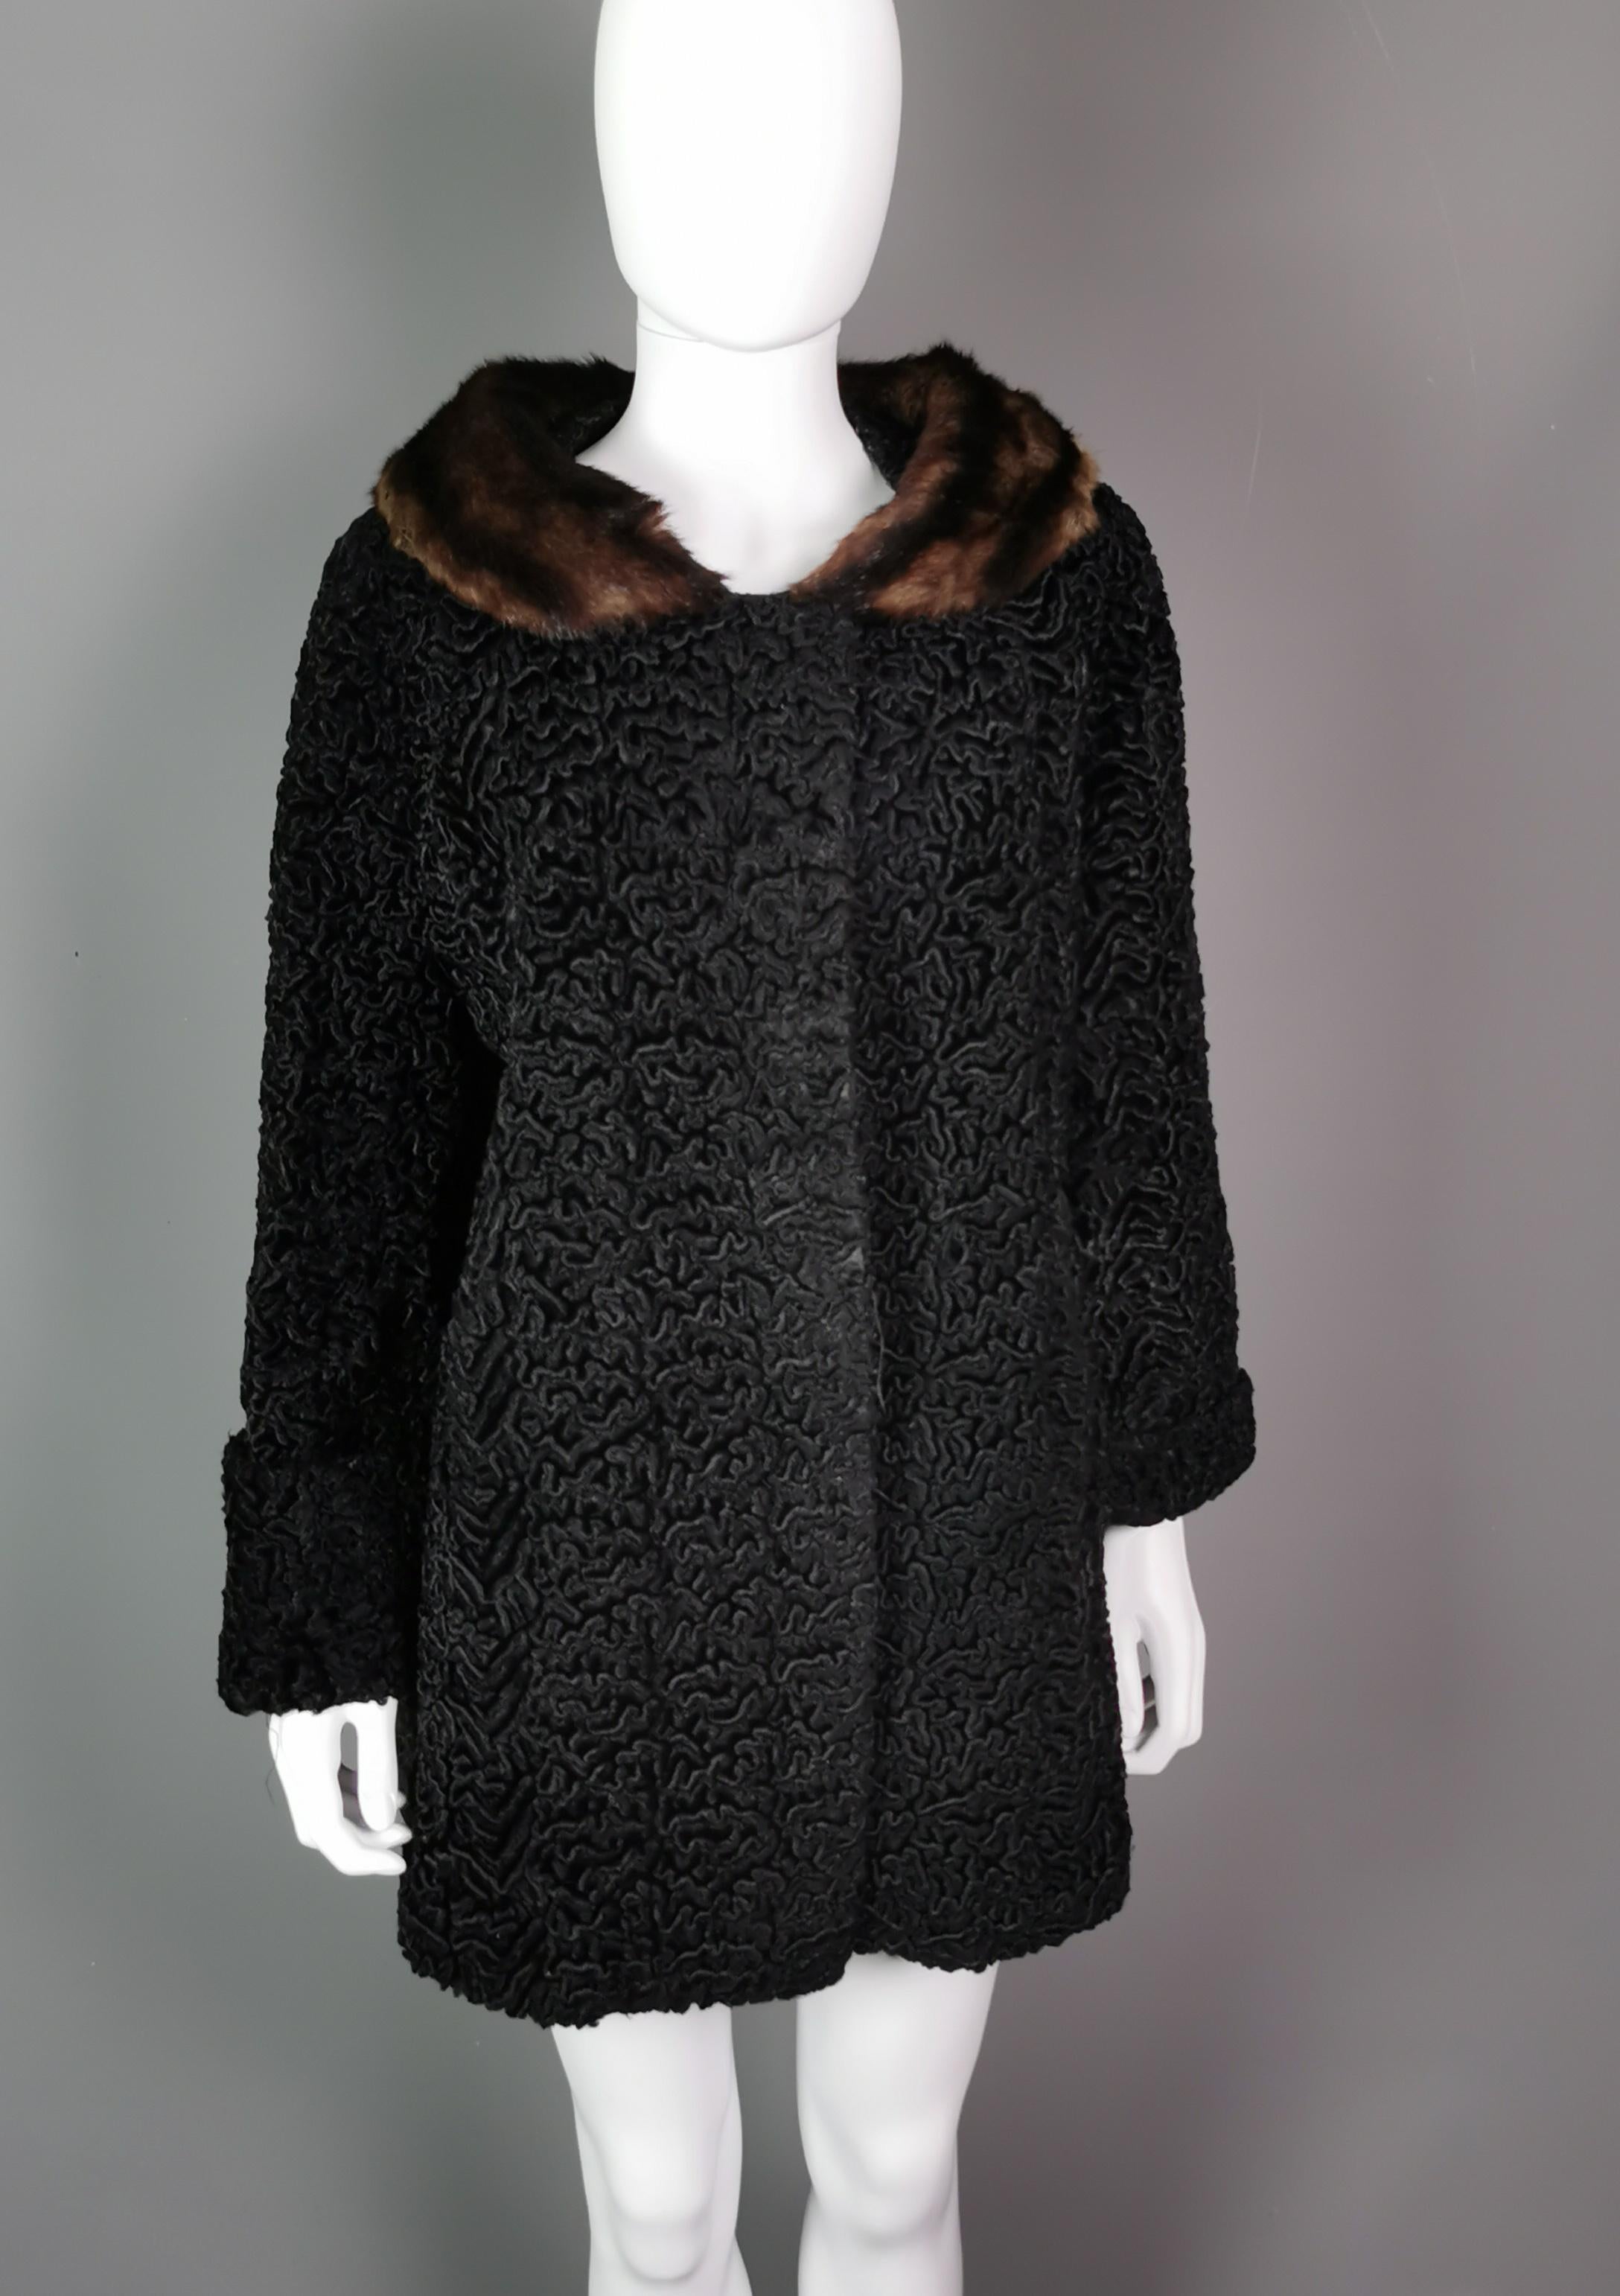 A gorgeous vintage 1950s Astrakhan coat.

Rich inky Black curly lamb wool with a brown mink fur collar.

It is long sleeved, a mid length duster style coat, it has no fasteners, it did have a hook fastener but this is no longer present.

The coat is